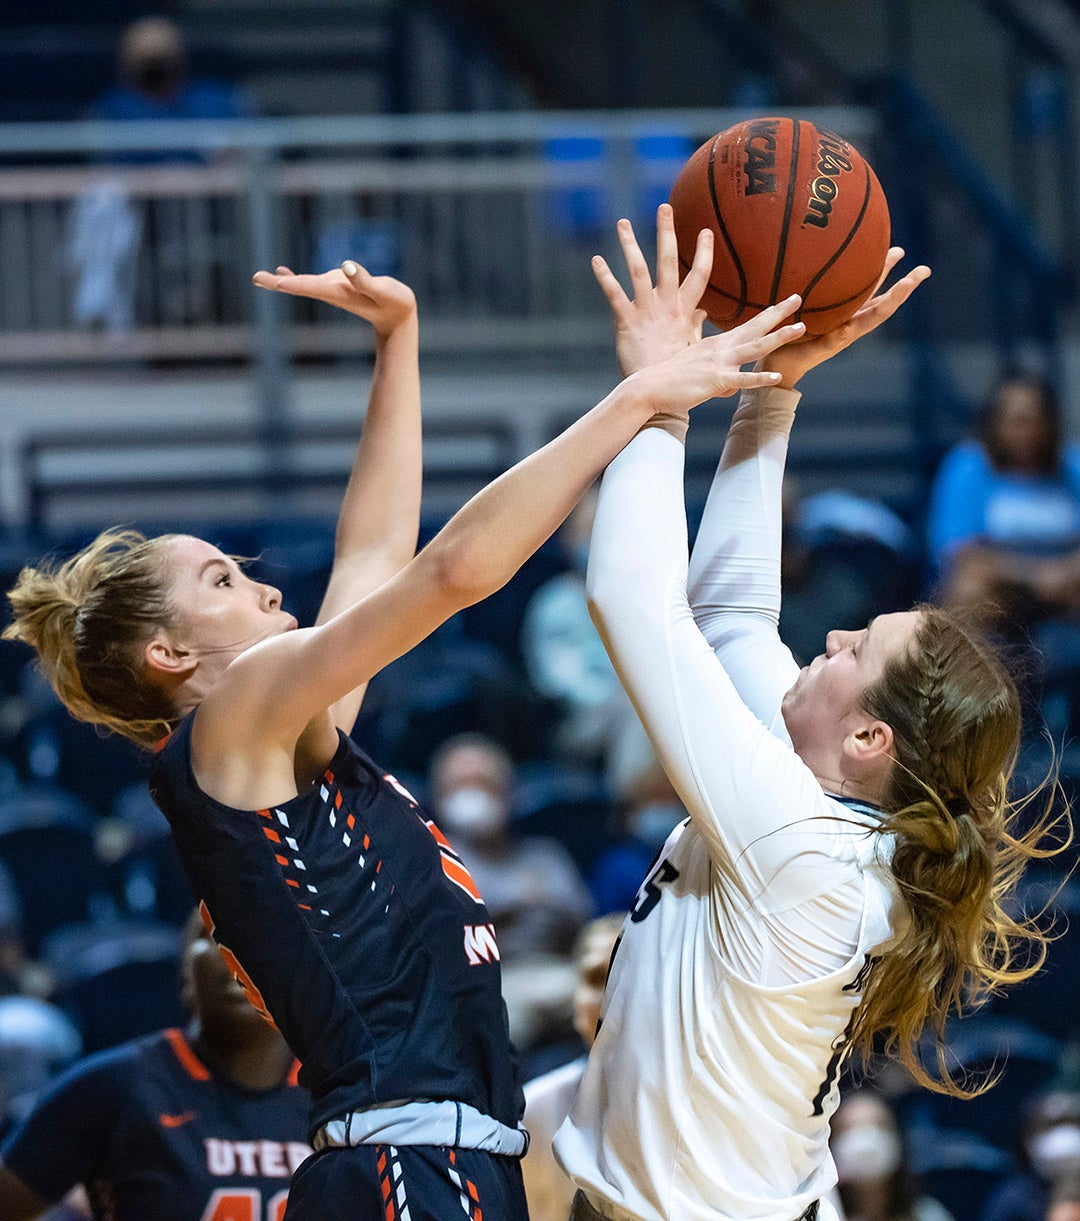 The Rice women's basketball team takes on UTEP March 3 at Tudor Fieldhouse. (Photo by Tommy LaVergne)